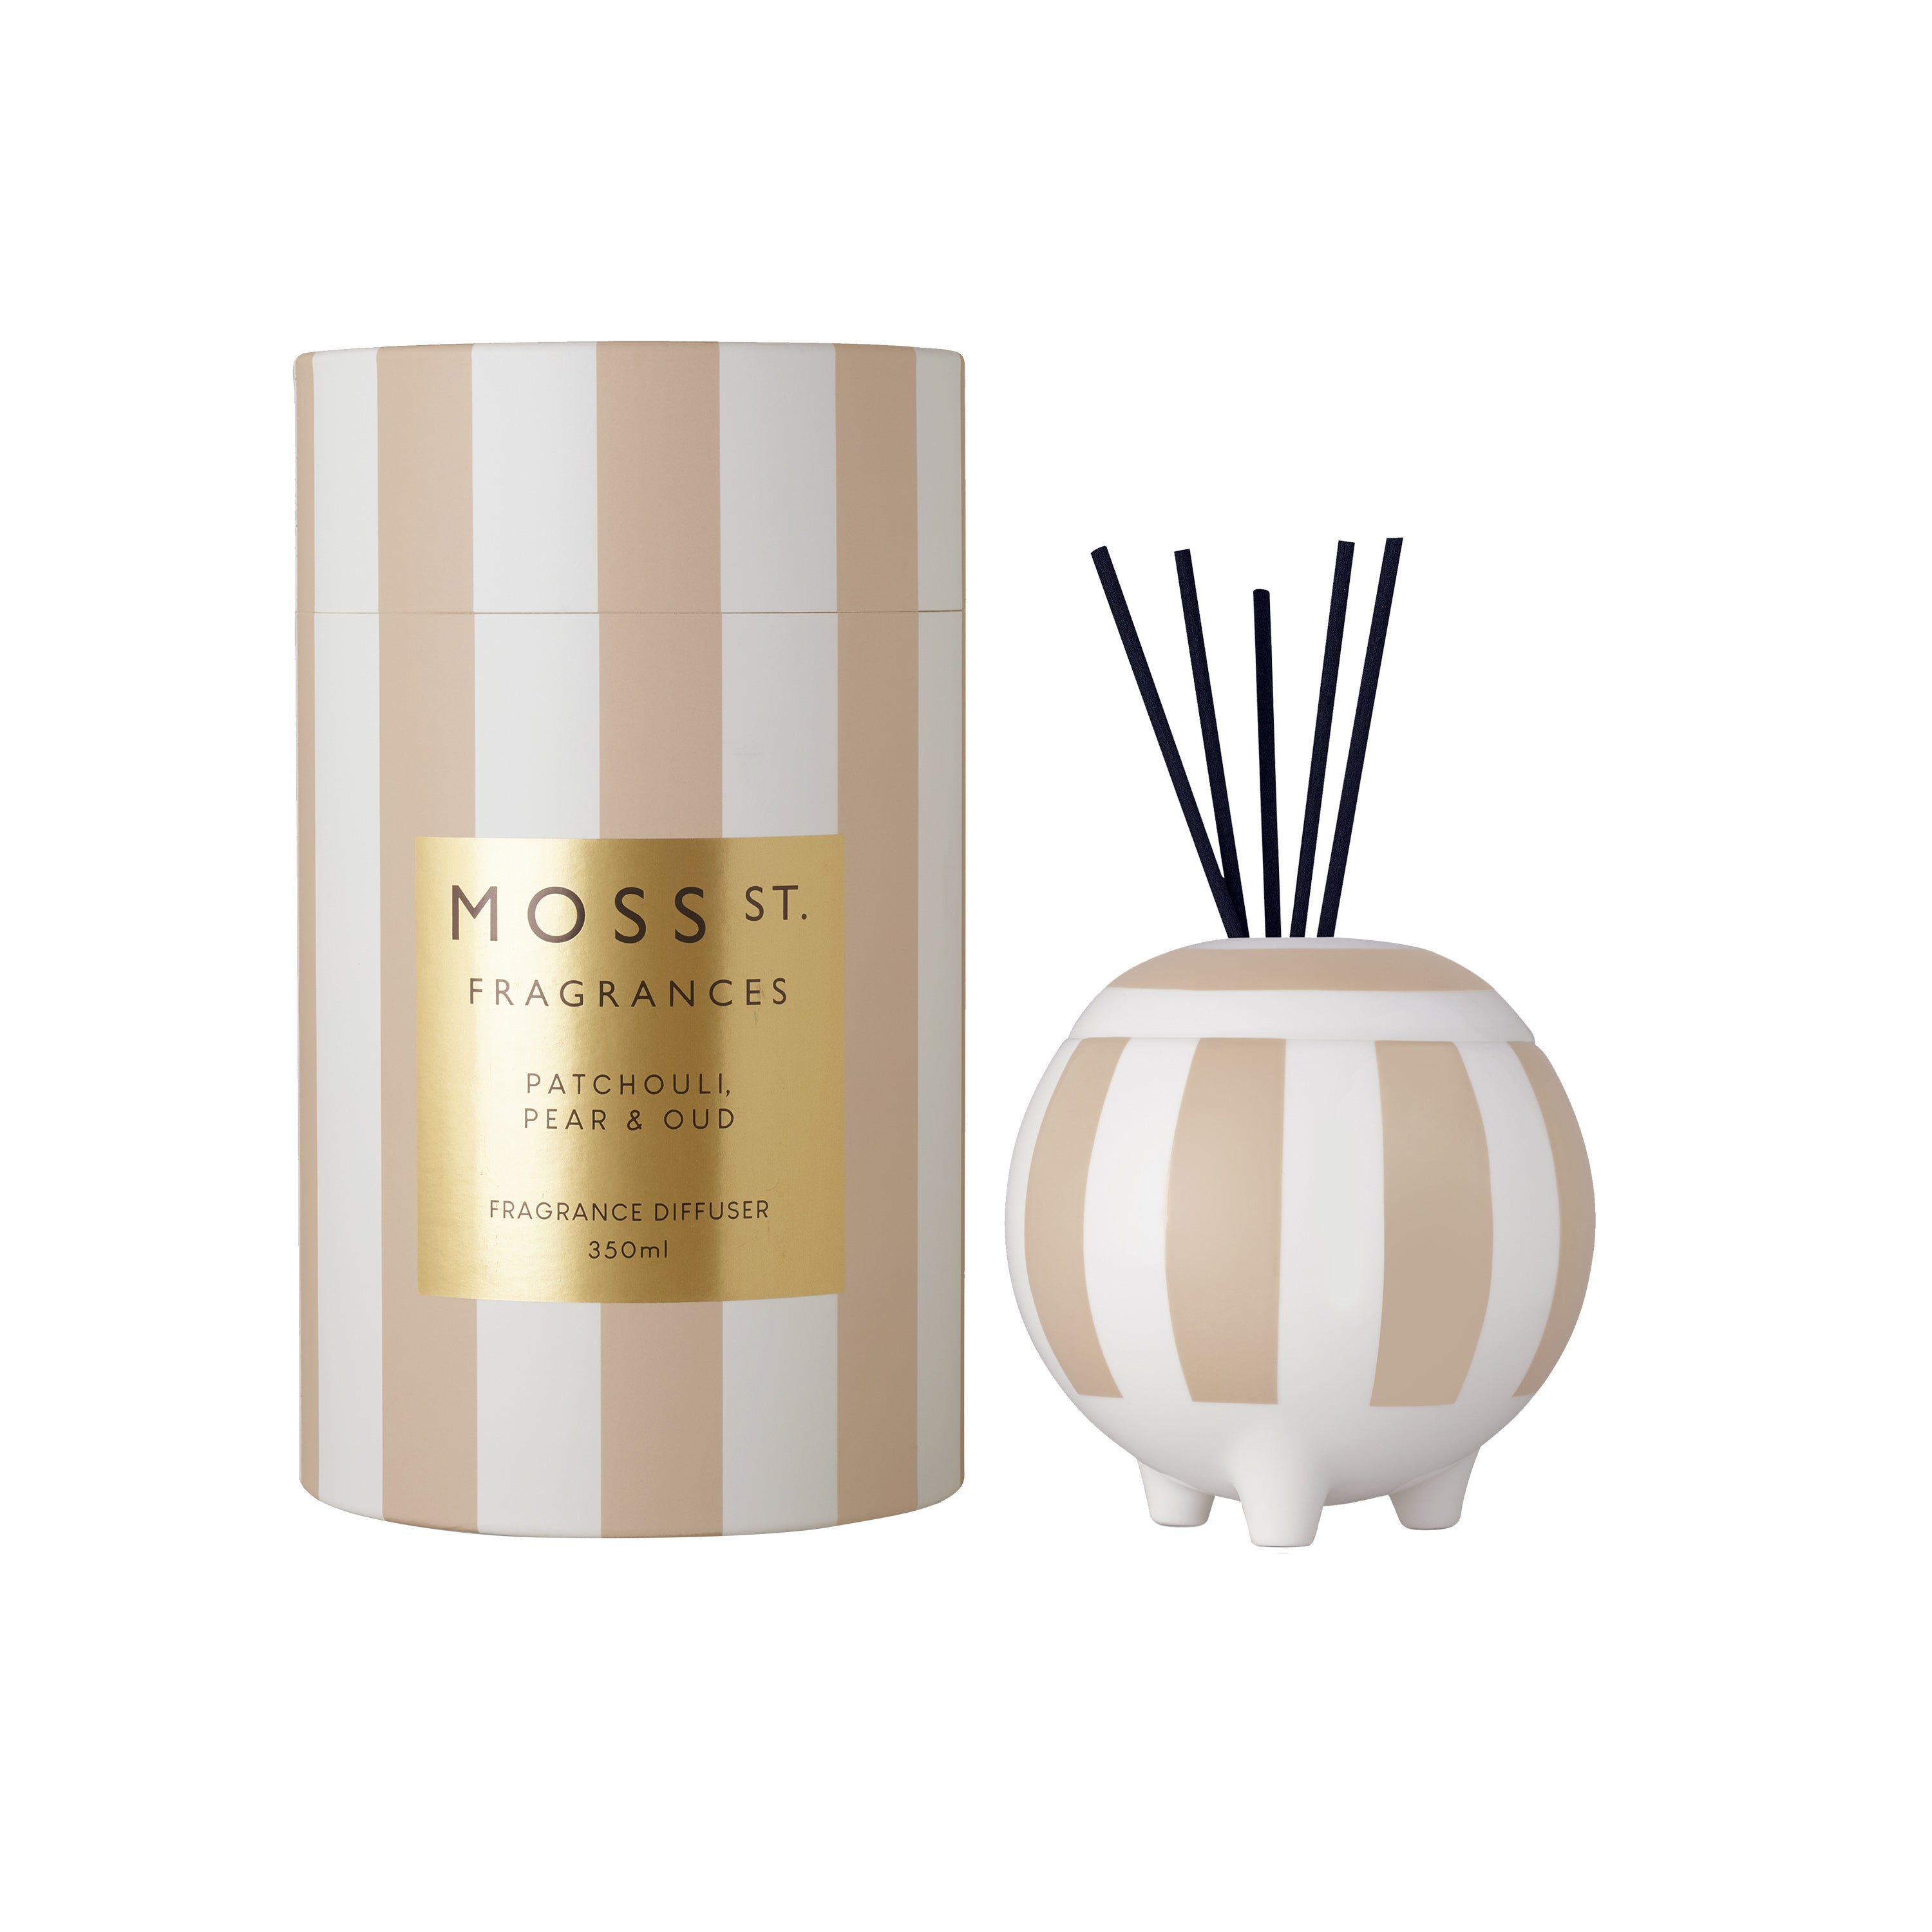 Moss St Patchouli, Pear & Oud Ceramic Large Diffuser 350ml